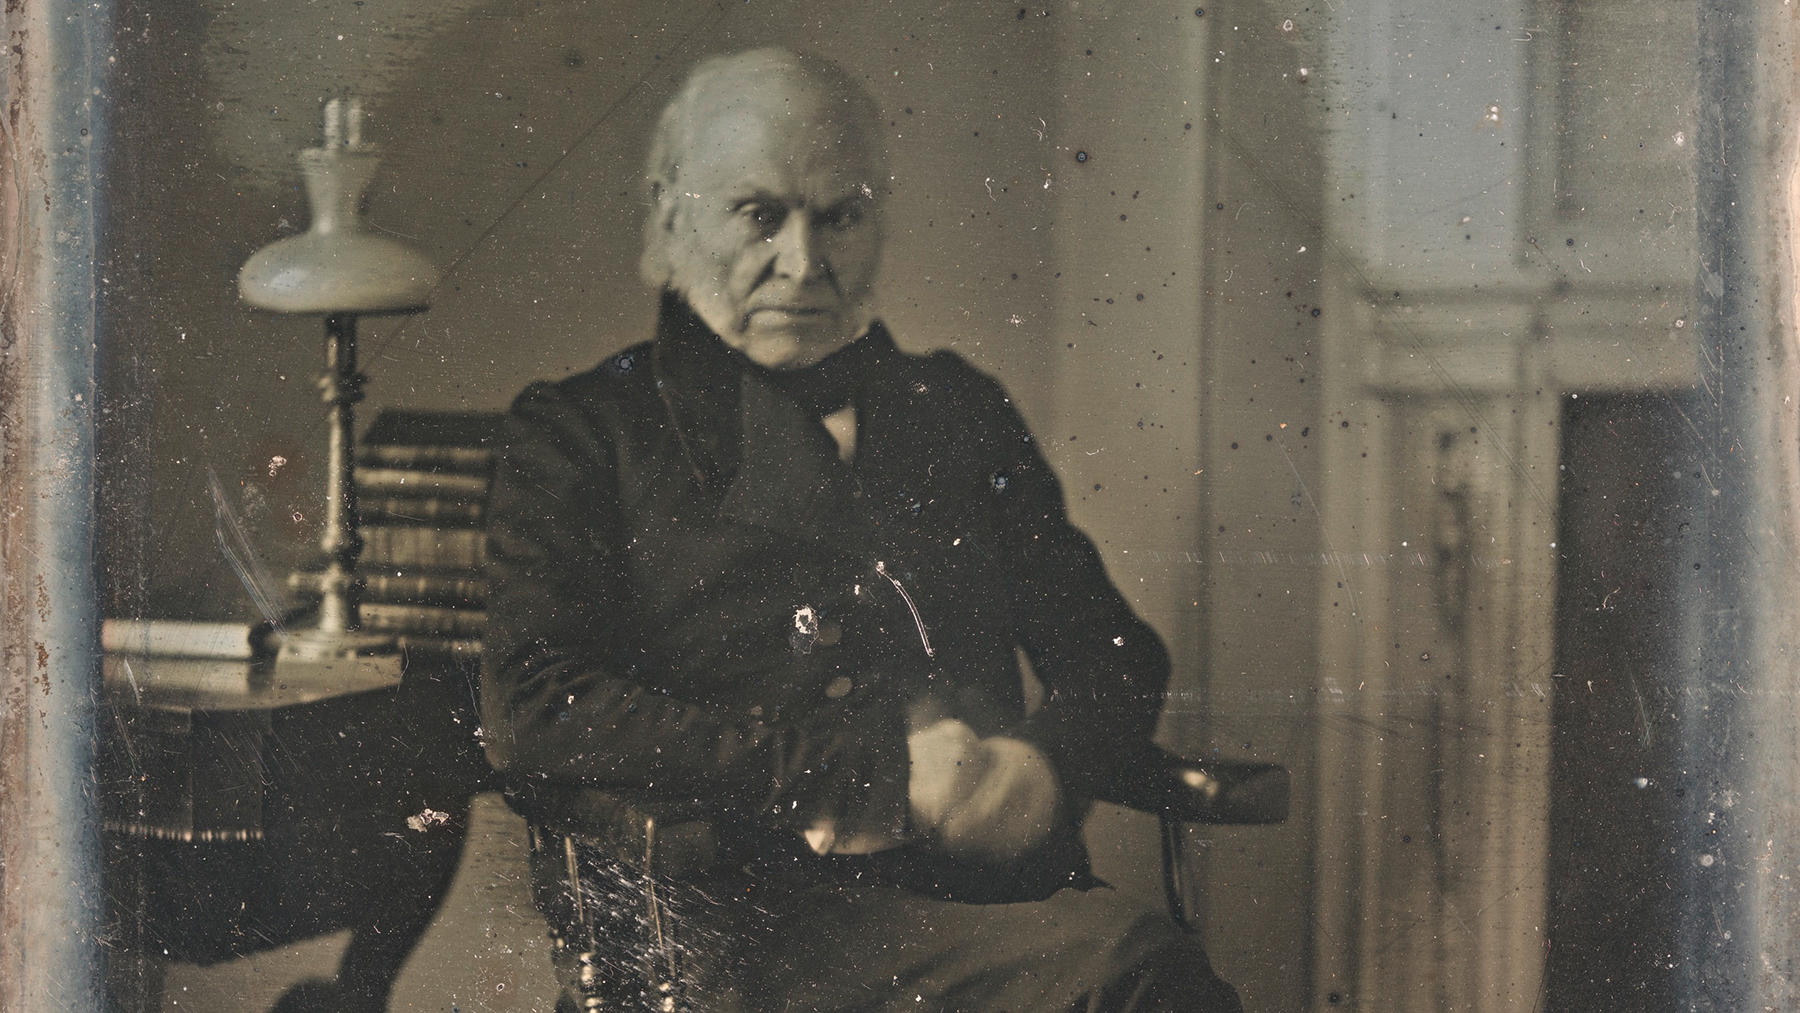 John Quincy Adams, in the earliest still-existing photo of a president, taken more than a dozen years after his term. Daguerreotype by Philip Haas, 1843, courtesy National Portrait Gallery, Smithsonian Institution